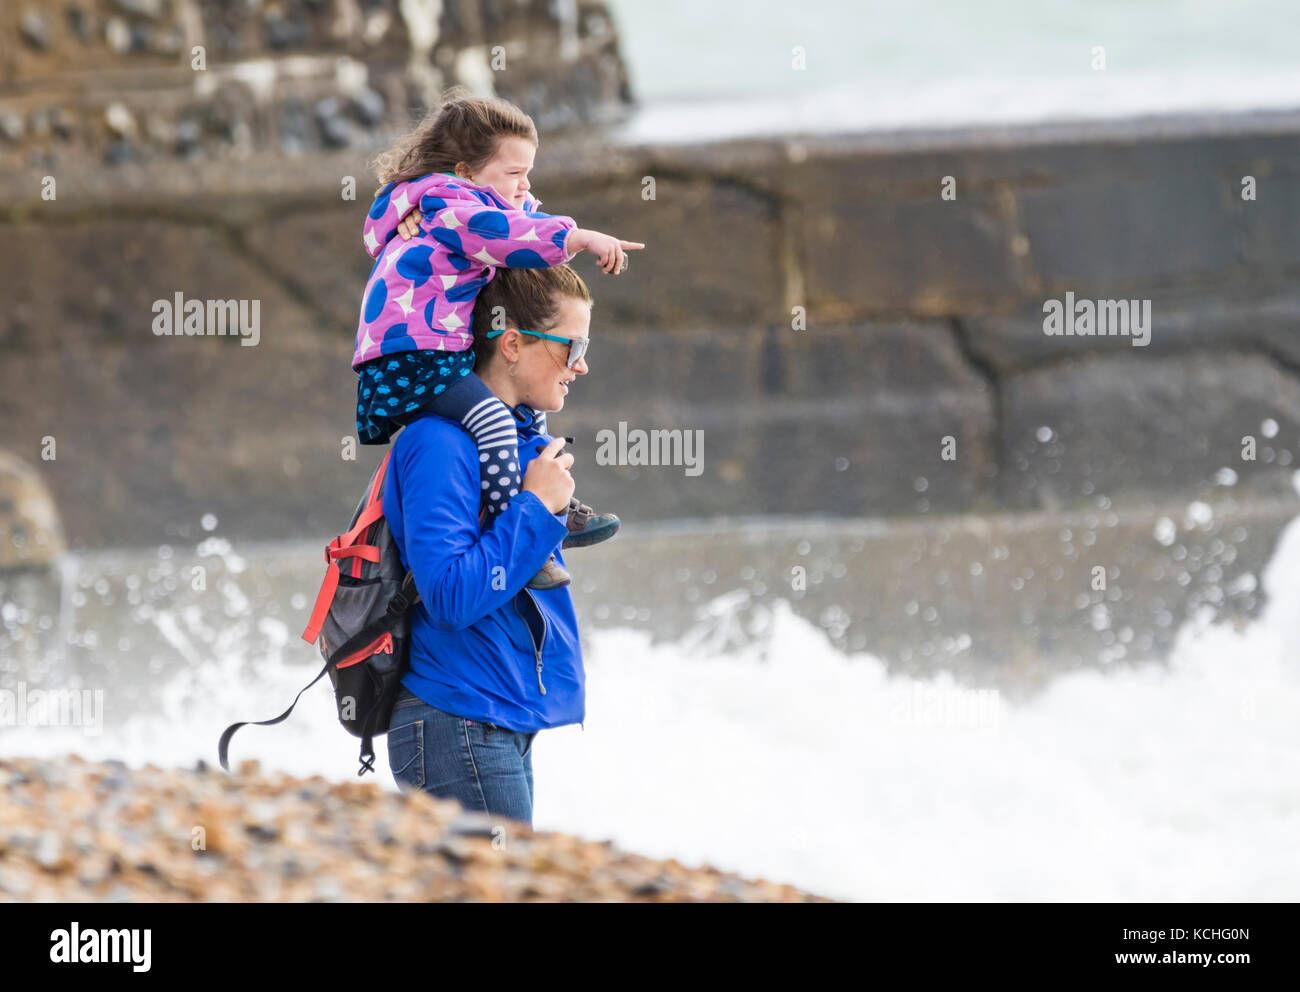 Young girl being carried on woman's shoulders (piggyback ride) on a beach in poor windy weather in Autumn, in Brighton, East Sussex, England, UK. Stock Photo